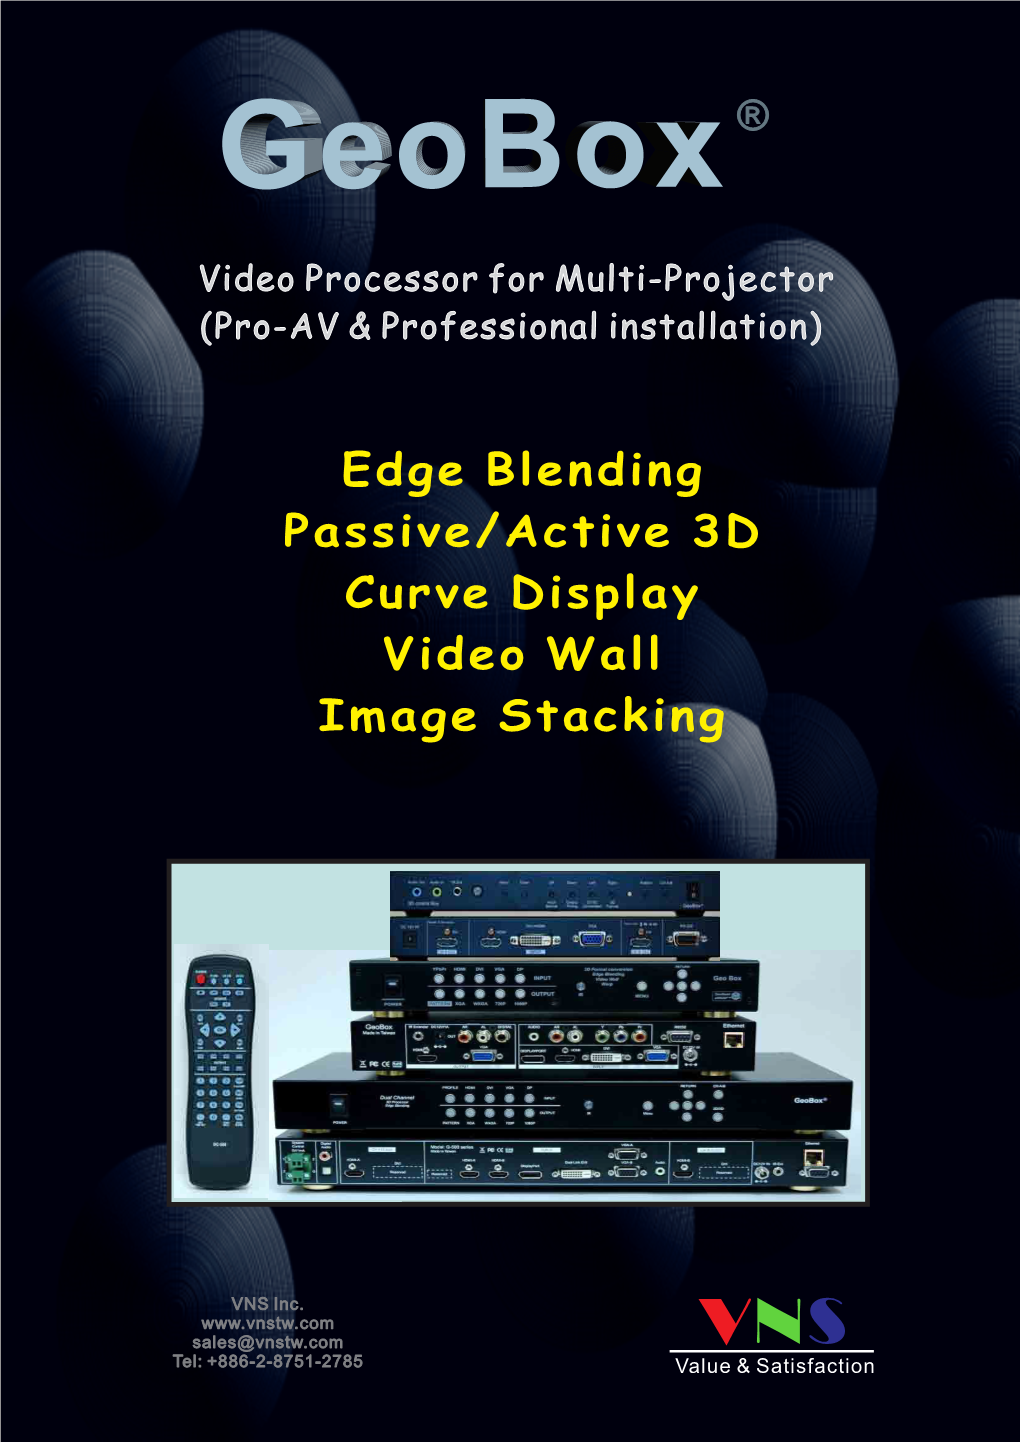 Edge Blending Passive/Active 3D Curve Display Video Wall Image Stacking